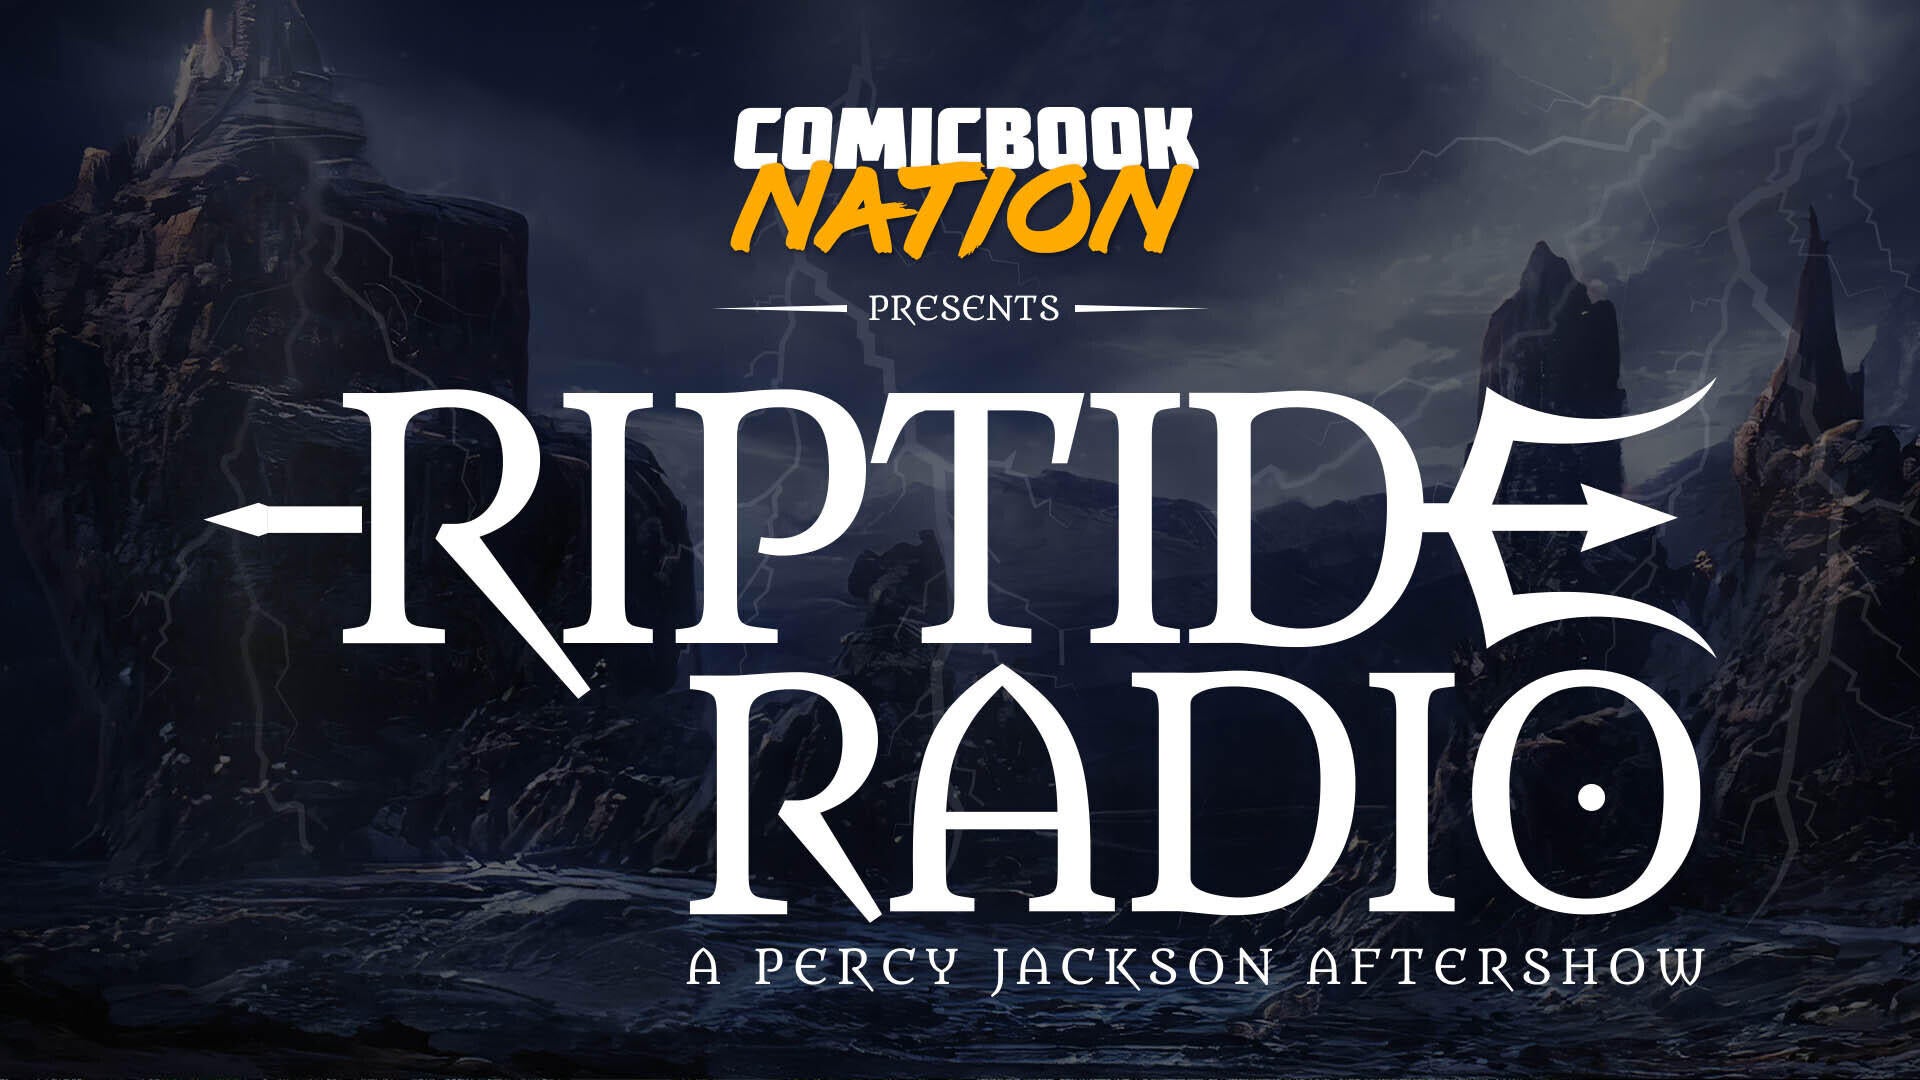 RIPTIDE-RADIO-PERCY-JACKSON-AFTERSHOW-COMICBOOK-NATION